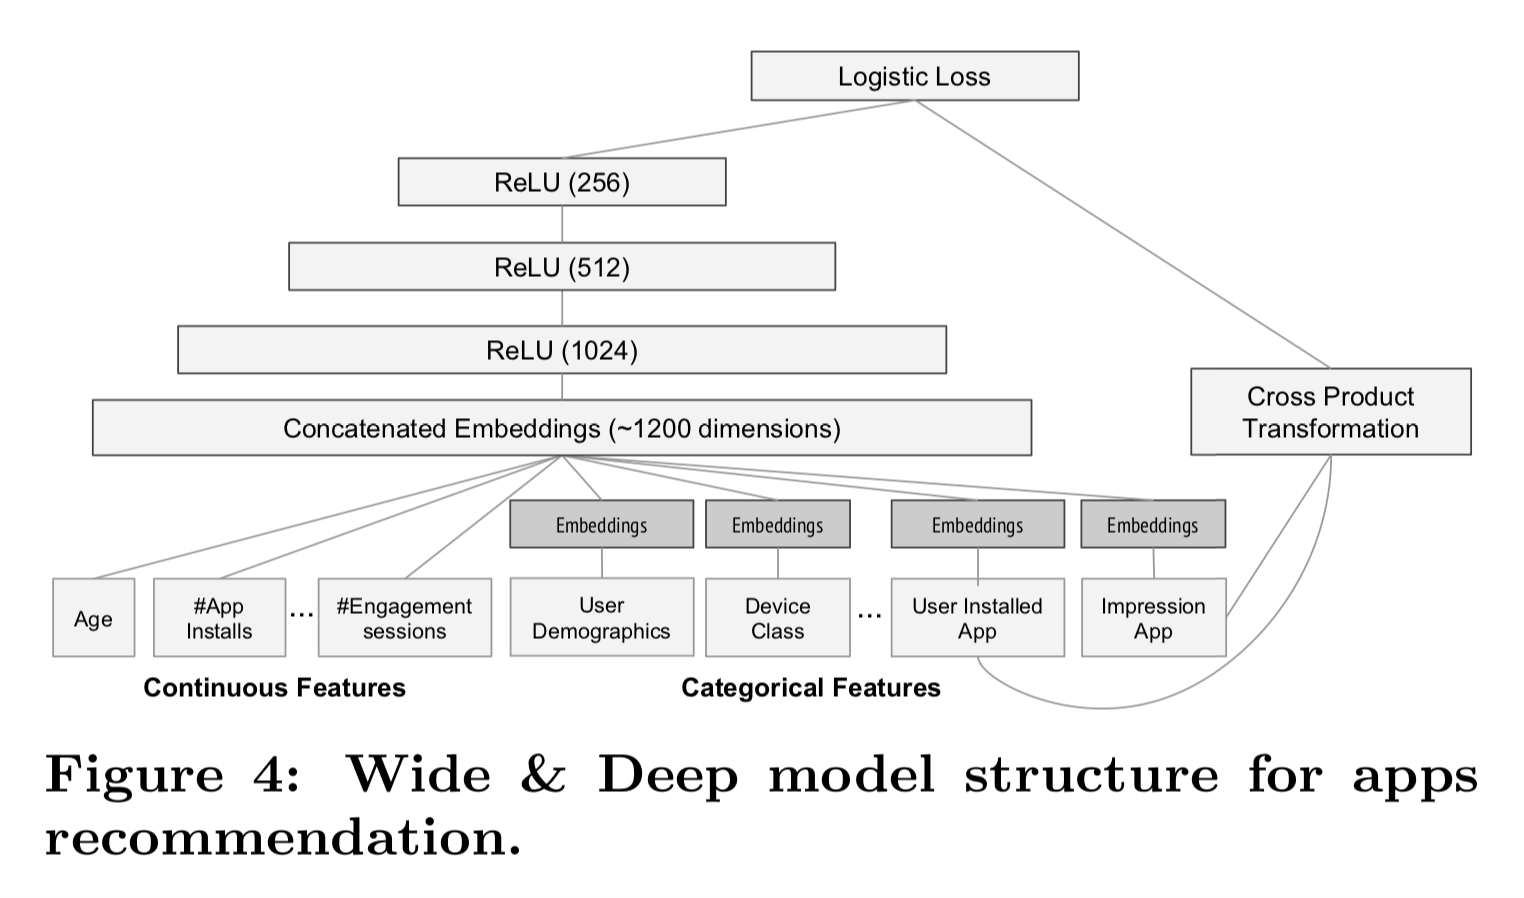 Wide & Deep model structure for apps recommendation